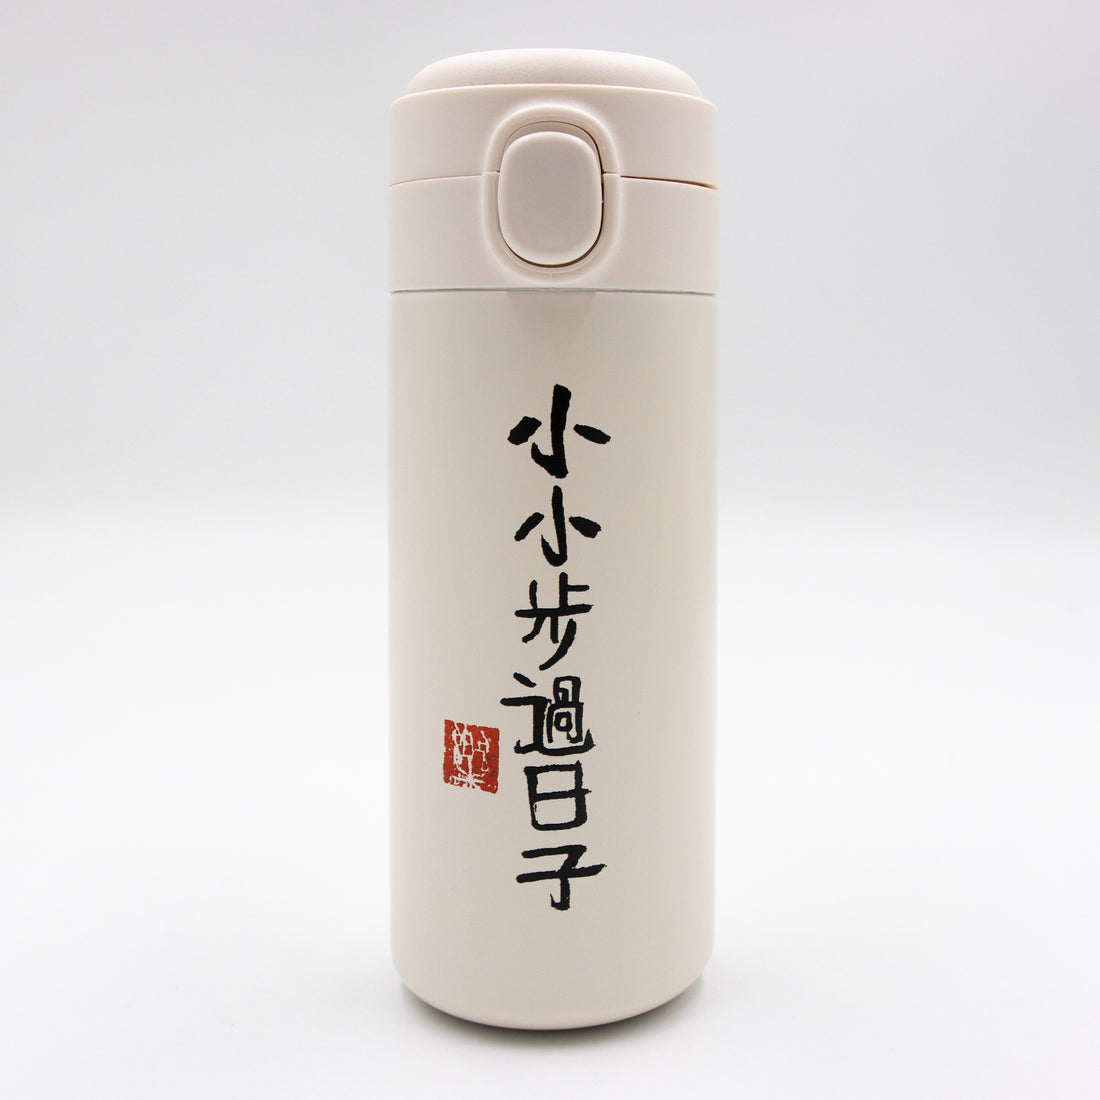 Junlefont 小小步过日子 保温瓶 Small steps every day Thermal Flask 350ml